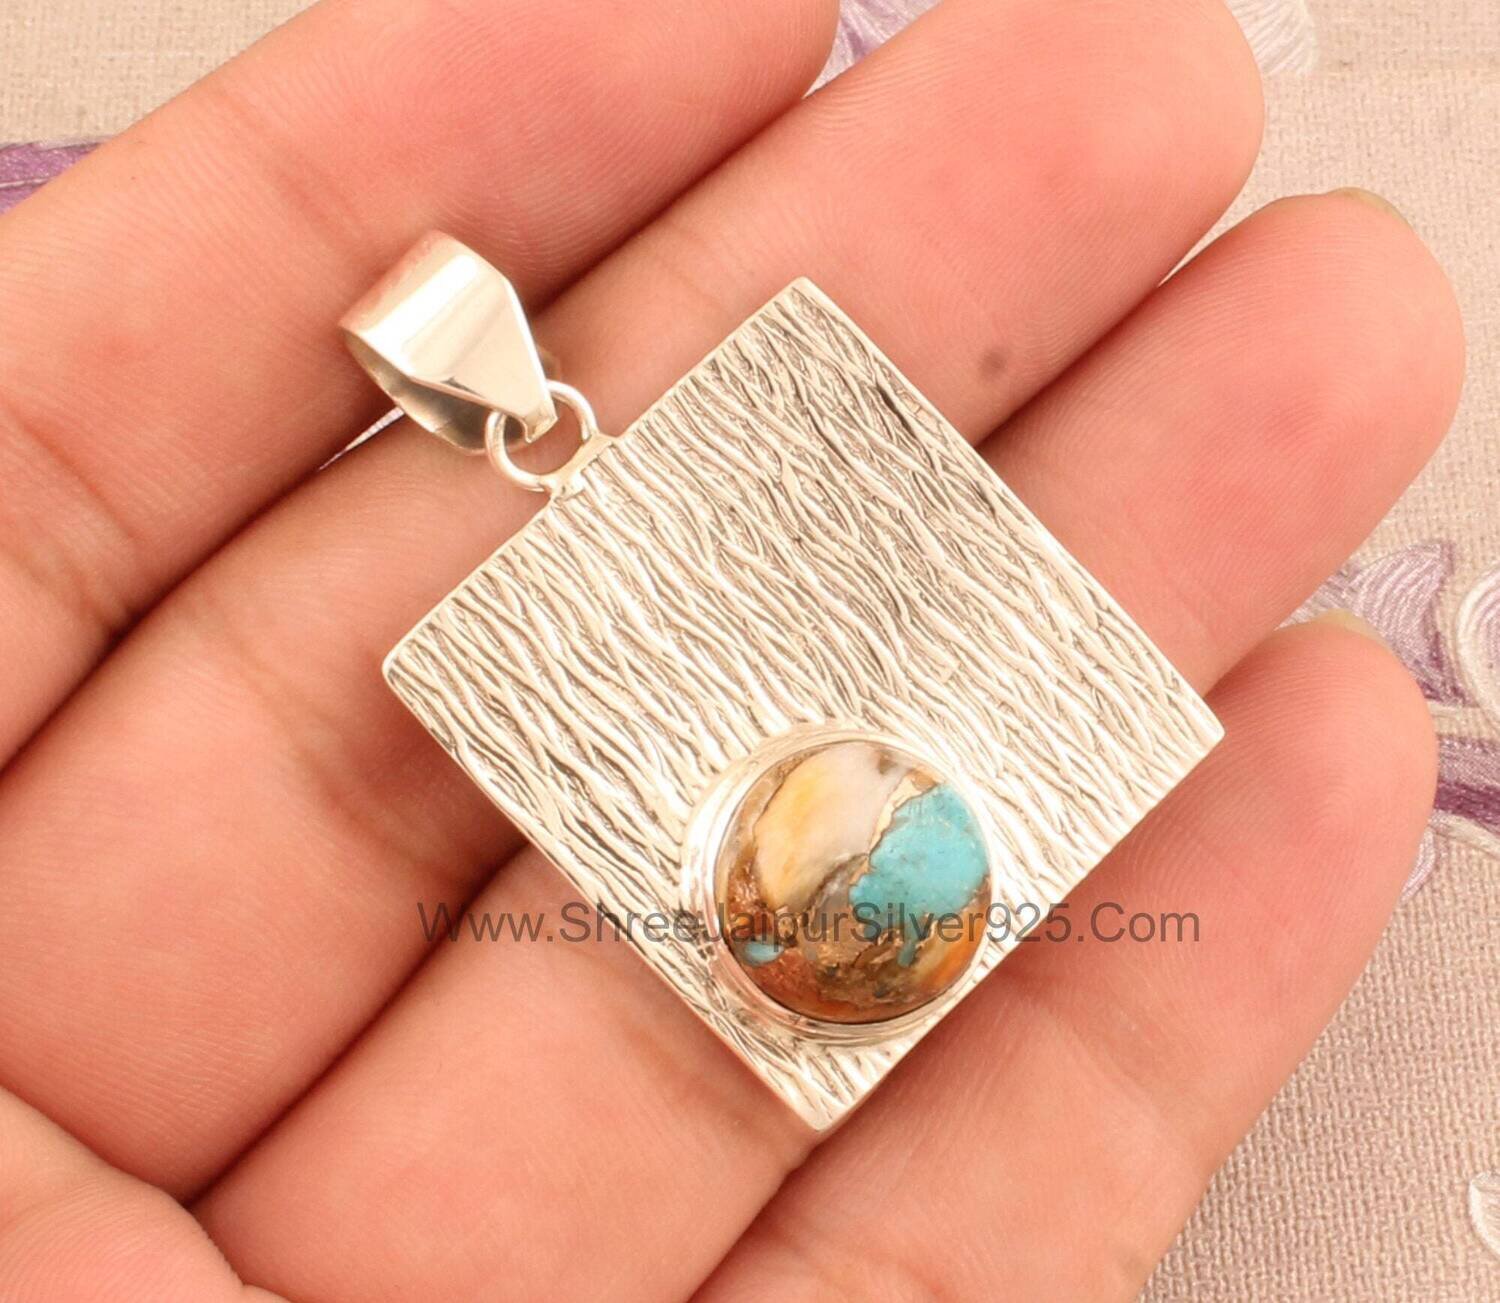 Oyster Copper Turquoise Solid 925 Sterling Silver Textured Necklace Pendant For Women, Handmade Round Stone Pendant For Wedding Anniversary